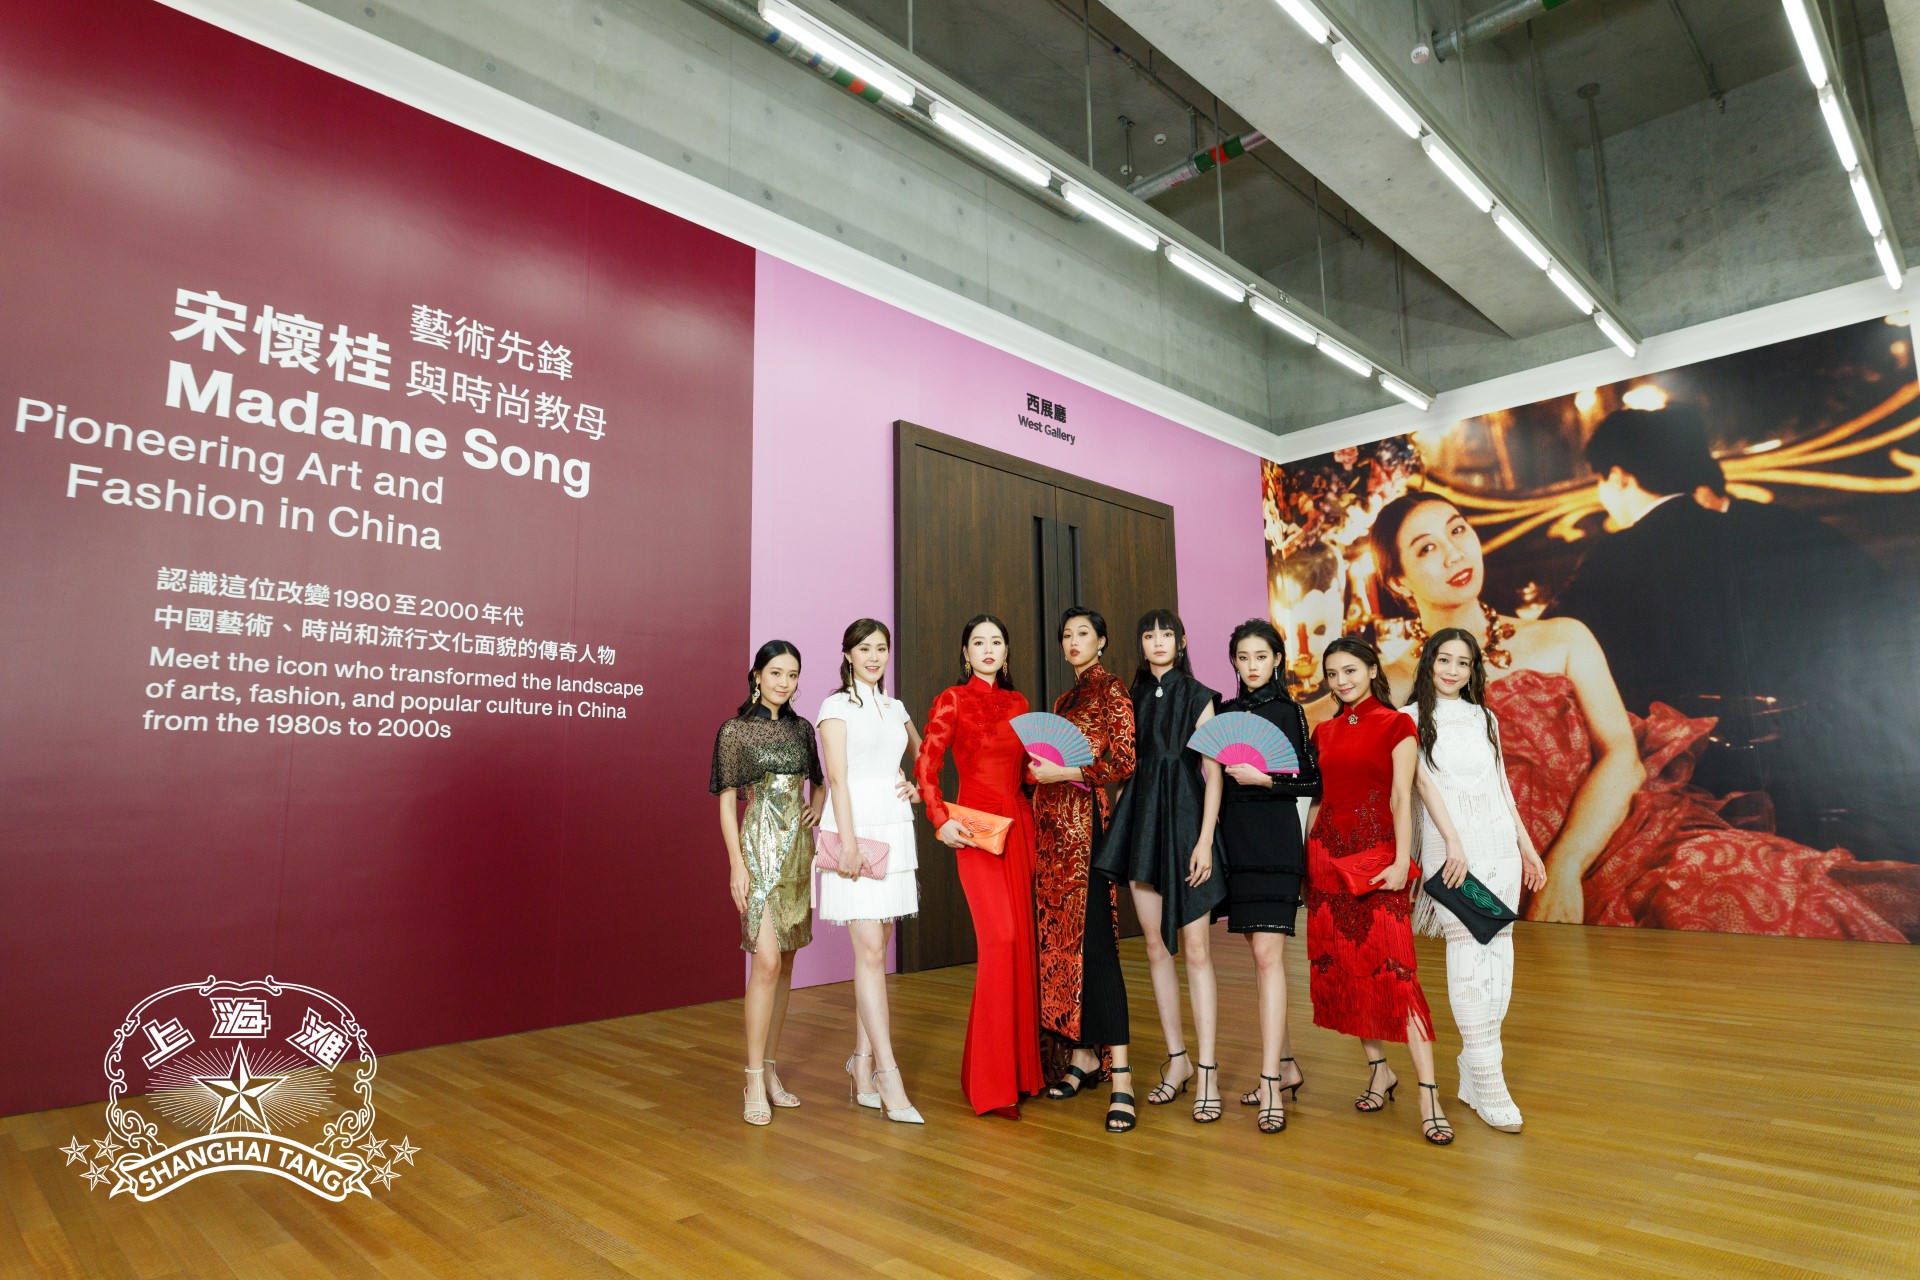 Eight Hong Kong celebrities and models wore Shanghai Tang Bespoke Imperial Tailoring collection made-to-order pieces at the opening ceremony of M+’s new exhibition ‘Madame Song: Pioneering Art and Fashion in China’. (Image Source: Courtesy of M+, Hong Kong and Photographer Michael CW Chiu)